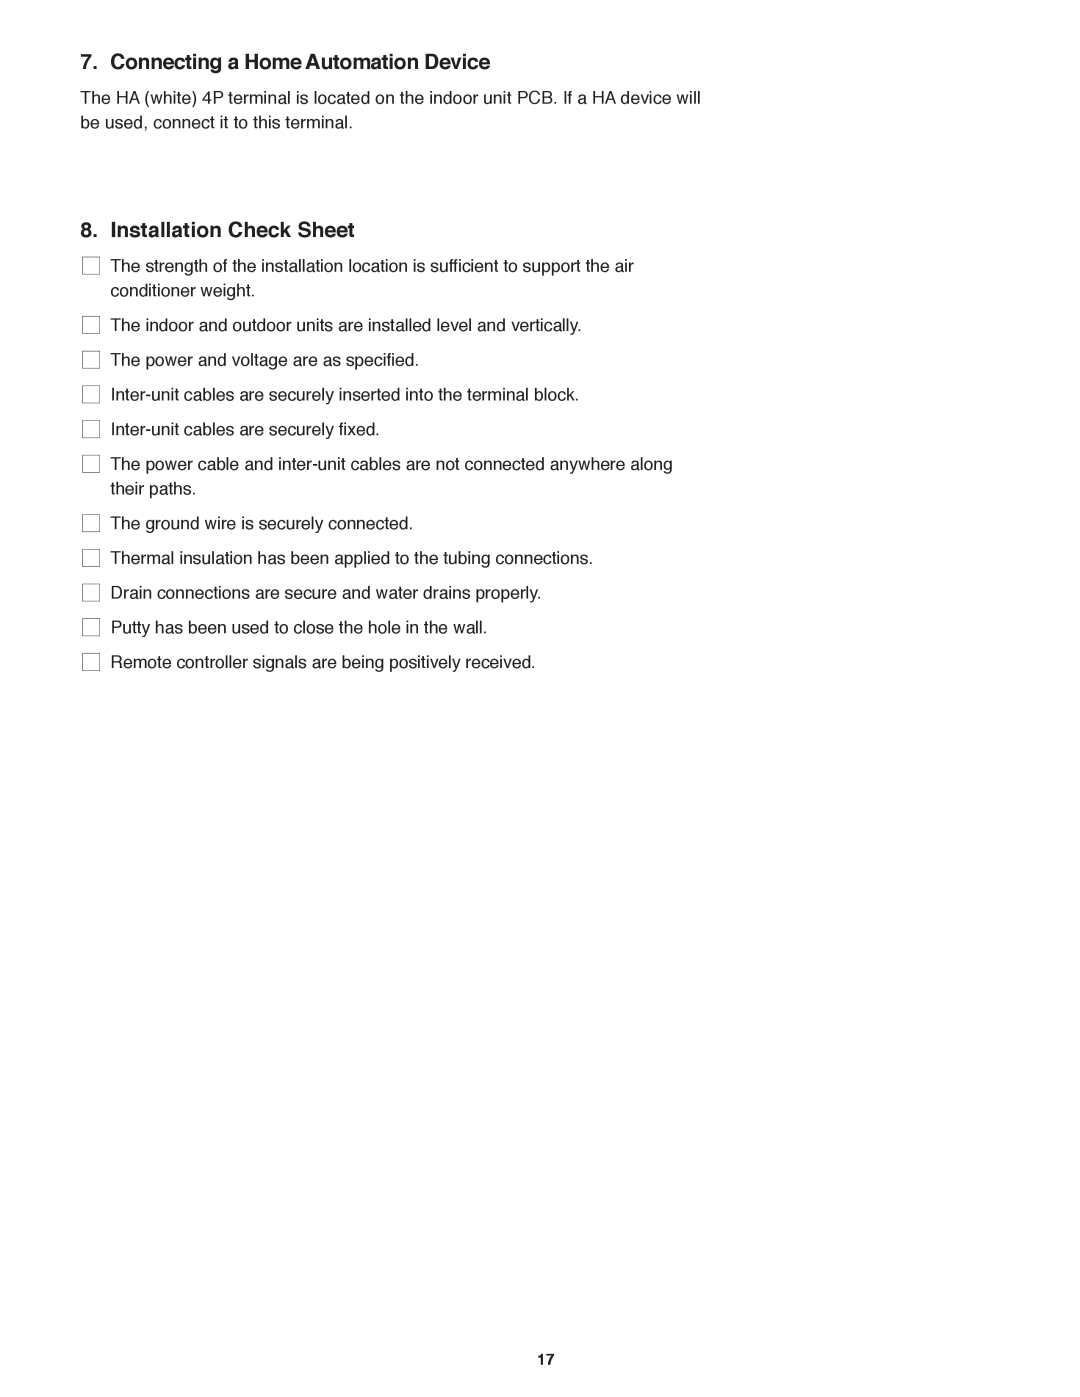 Panasonic R410A service manual Connecting a Home Automation Device, Installation Check Sheet 